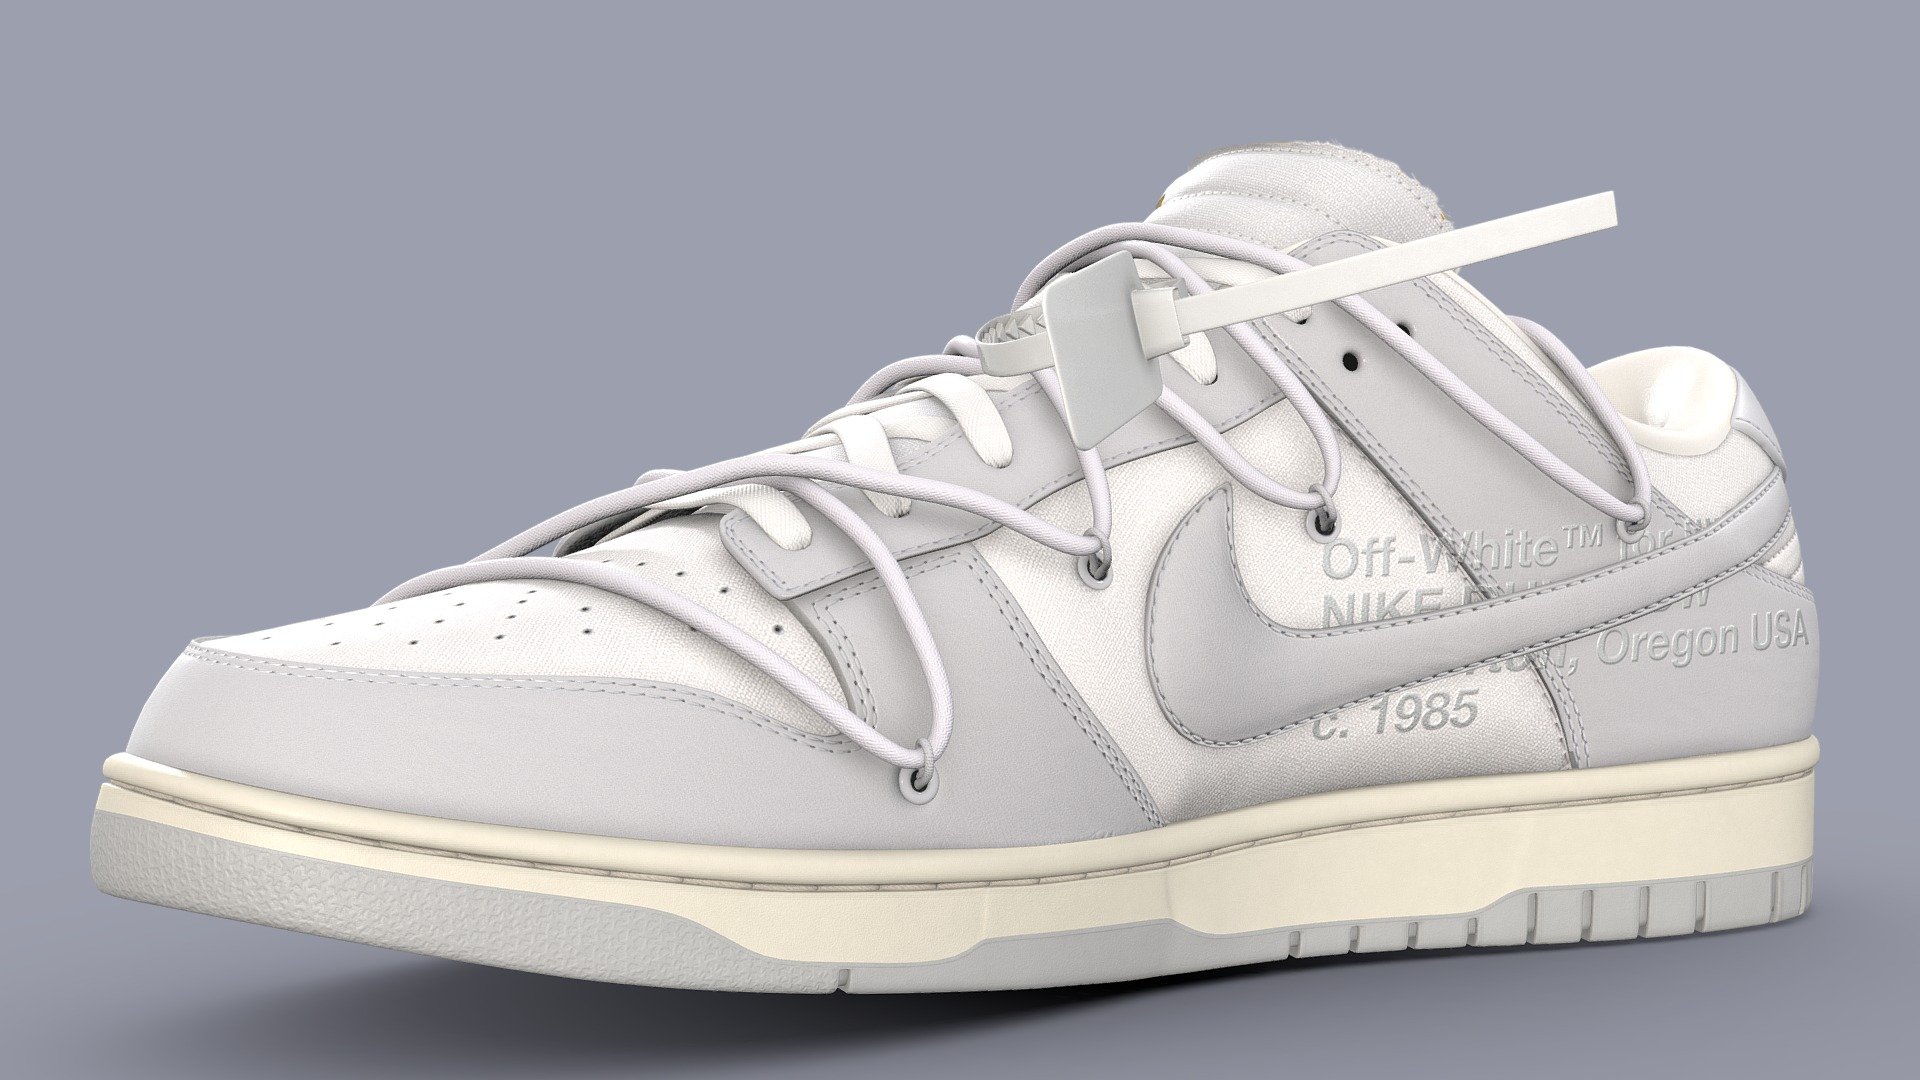 Off White collaboration with Nike on a Dunk Low, made in Blender, textured in Substance. Released in 2021. Each Lot has its own unique twist, this particular colourway opts for subtle tones of grey.

Every detail was made in the recreation of this shoe, from the text on the medial side of the shoe to the subtlety of each material, nothing went overlooked. Stitches were sculpted by hand to achieve the highest quality, and the frayed edge on the tongue of the shoe was created such that there would be no gap between the canvas fabric and foam

What's included Firstly, two versions of this model. The base version with 4 texture sets, and a One Mesh version that uses only 1 texture set. Both models are identical, only how they are unwrapped is different. There are two texture sets, with 4 maps, namely: Base Color, Metallic, Normal, and Roughness. I have included several other versions, such as High and Low Poly shoes All textures are 4096x4096. Meaning the One Mesh version has 4 2048x2048 textures 3d model